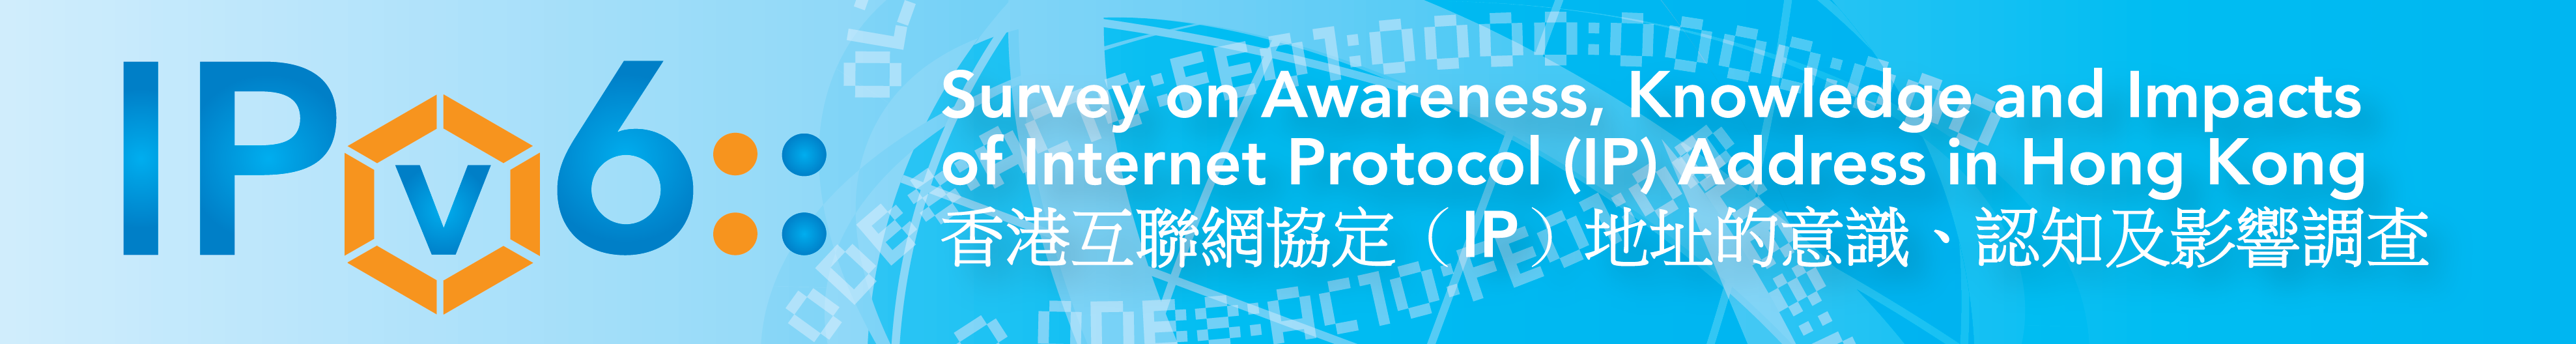 Banner - survey on awareness, knowledge and impacts of internet protocol (IP) address in Hong Kong